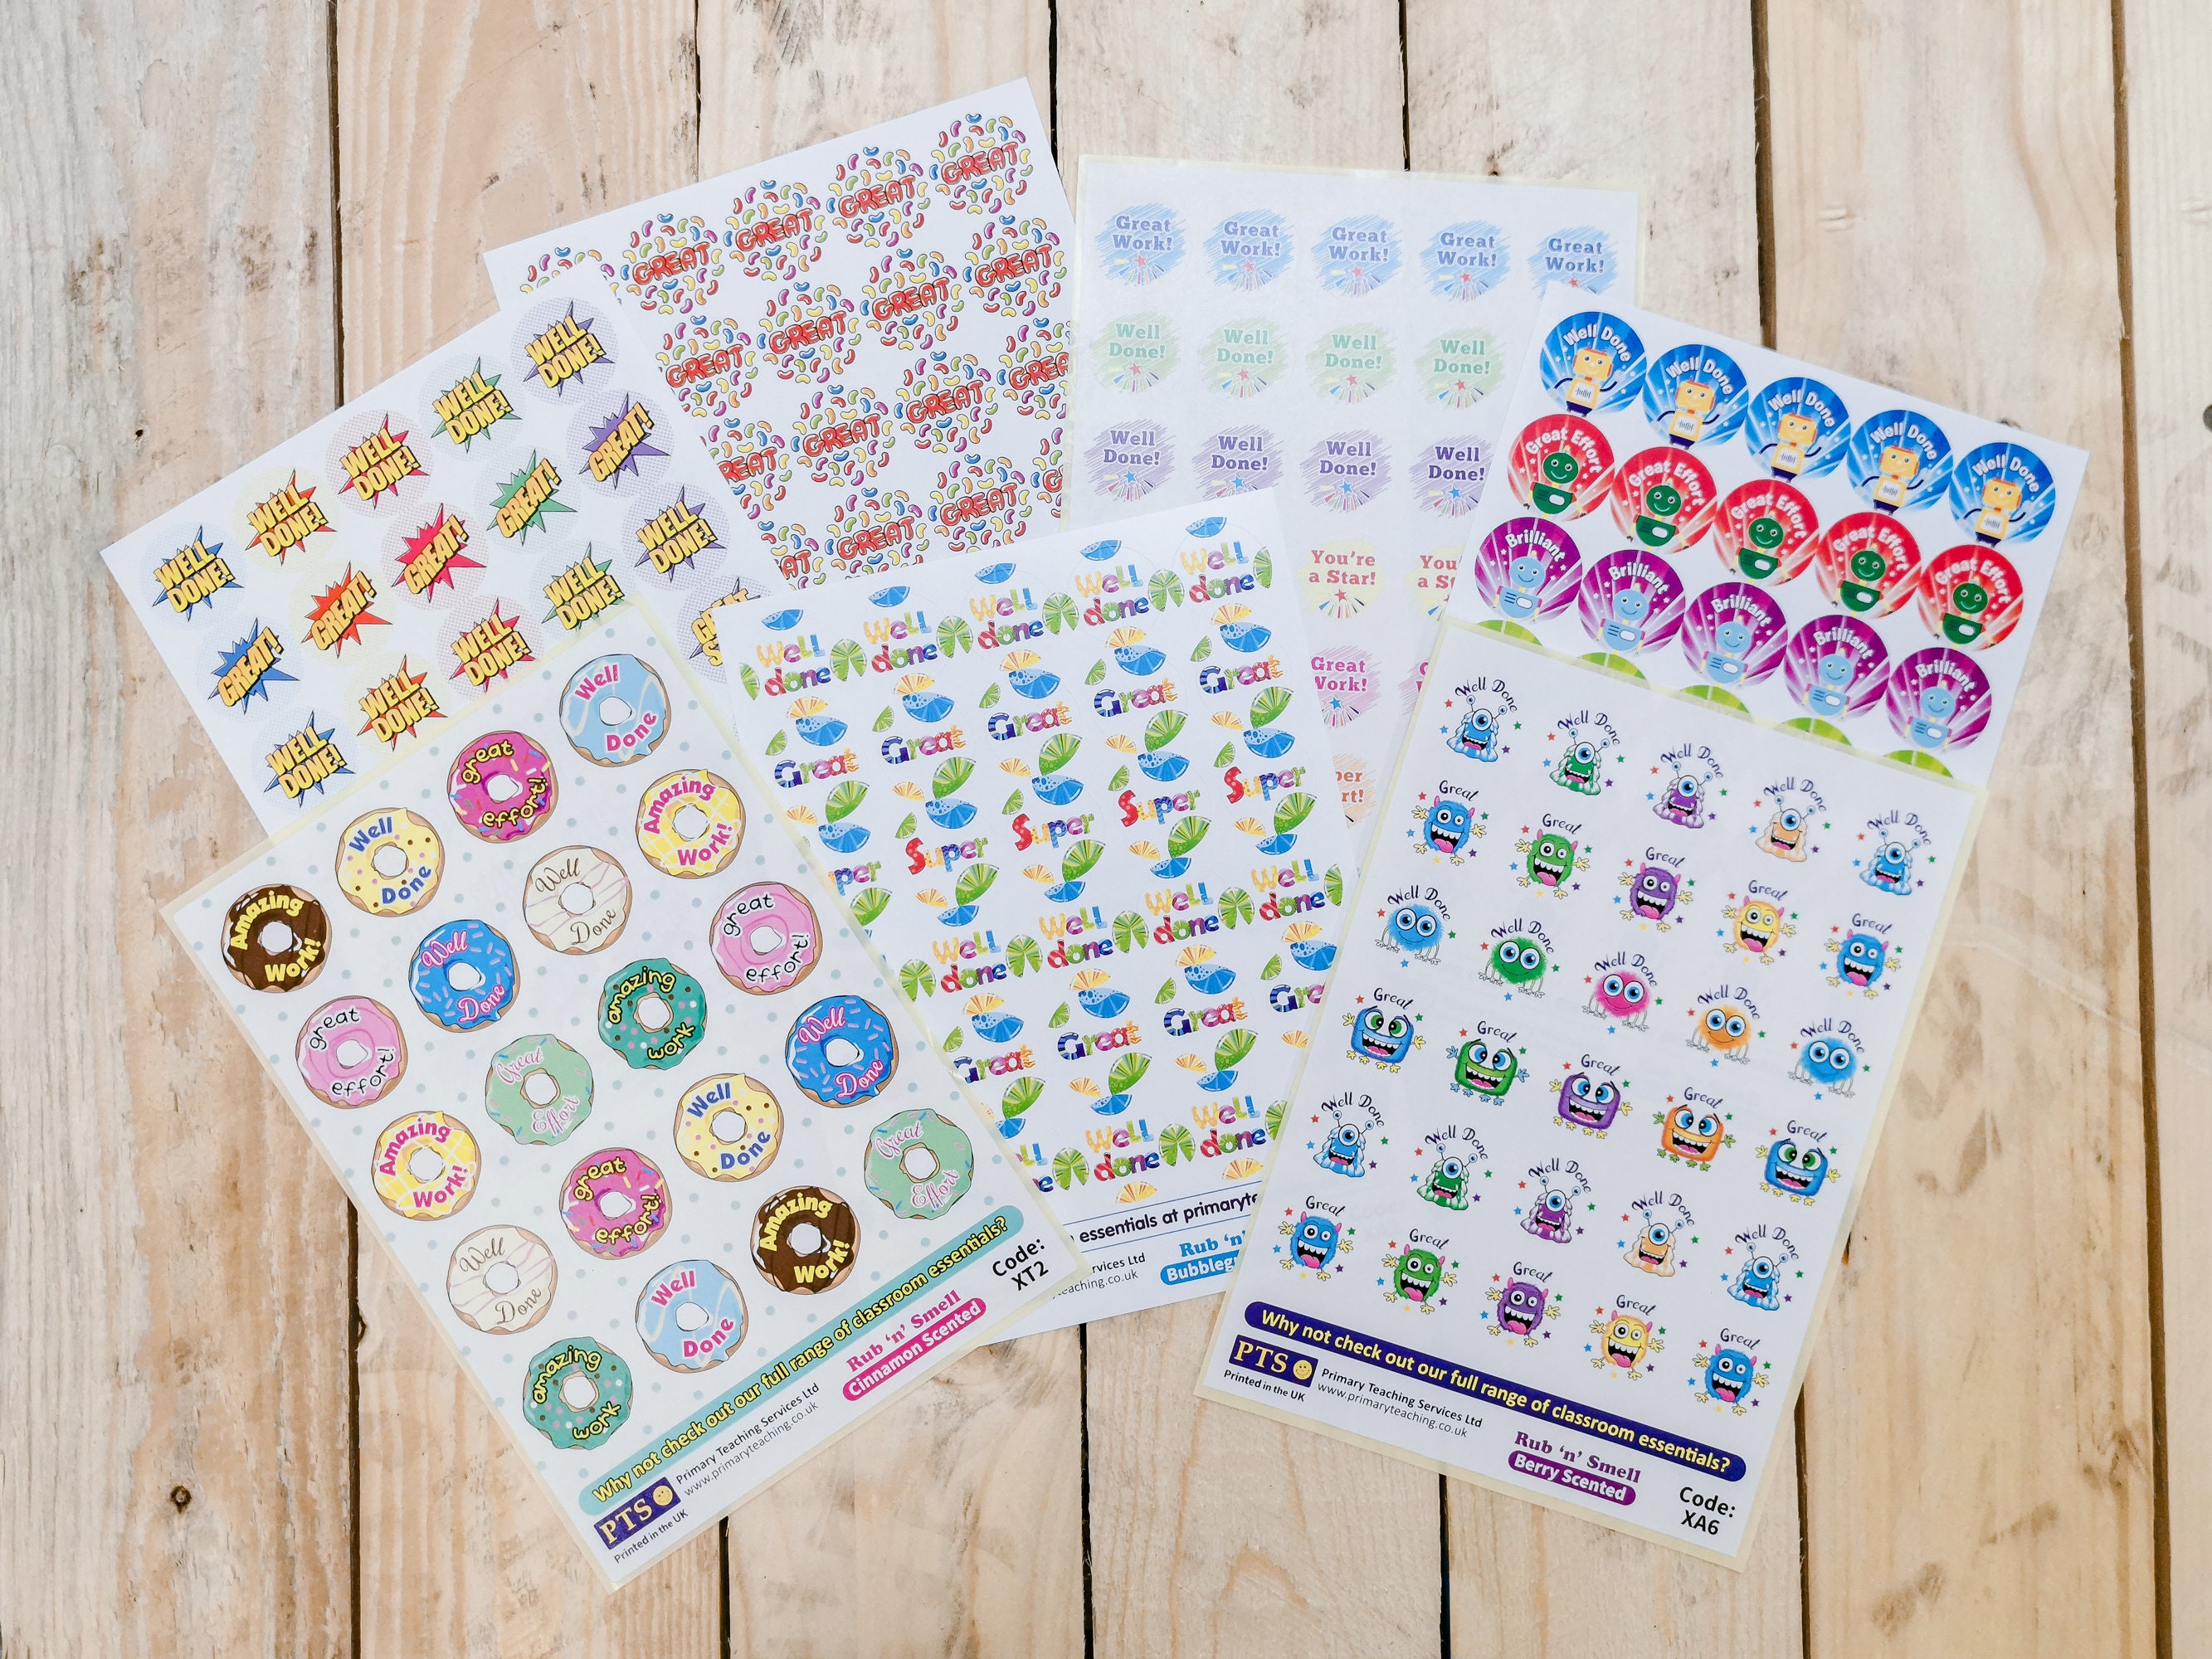 Lakeshore Kid Zone Scented Stickers - Variety Pack